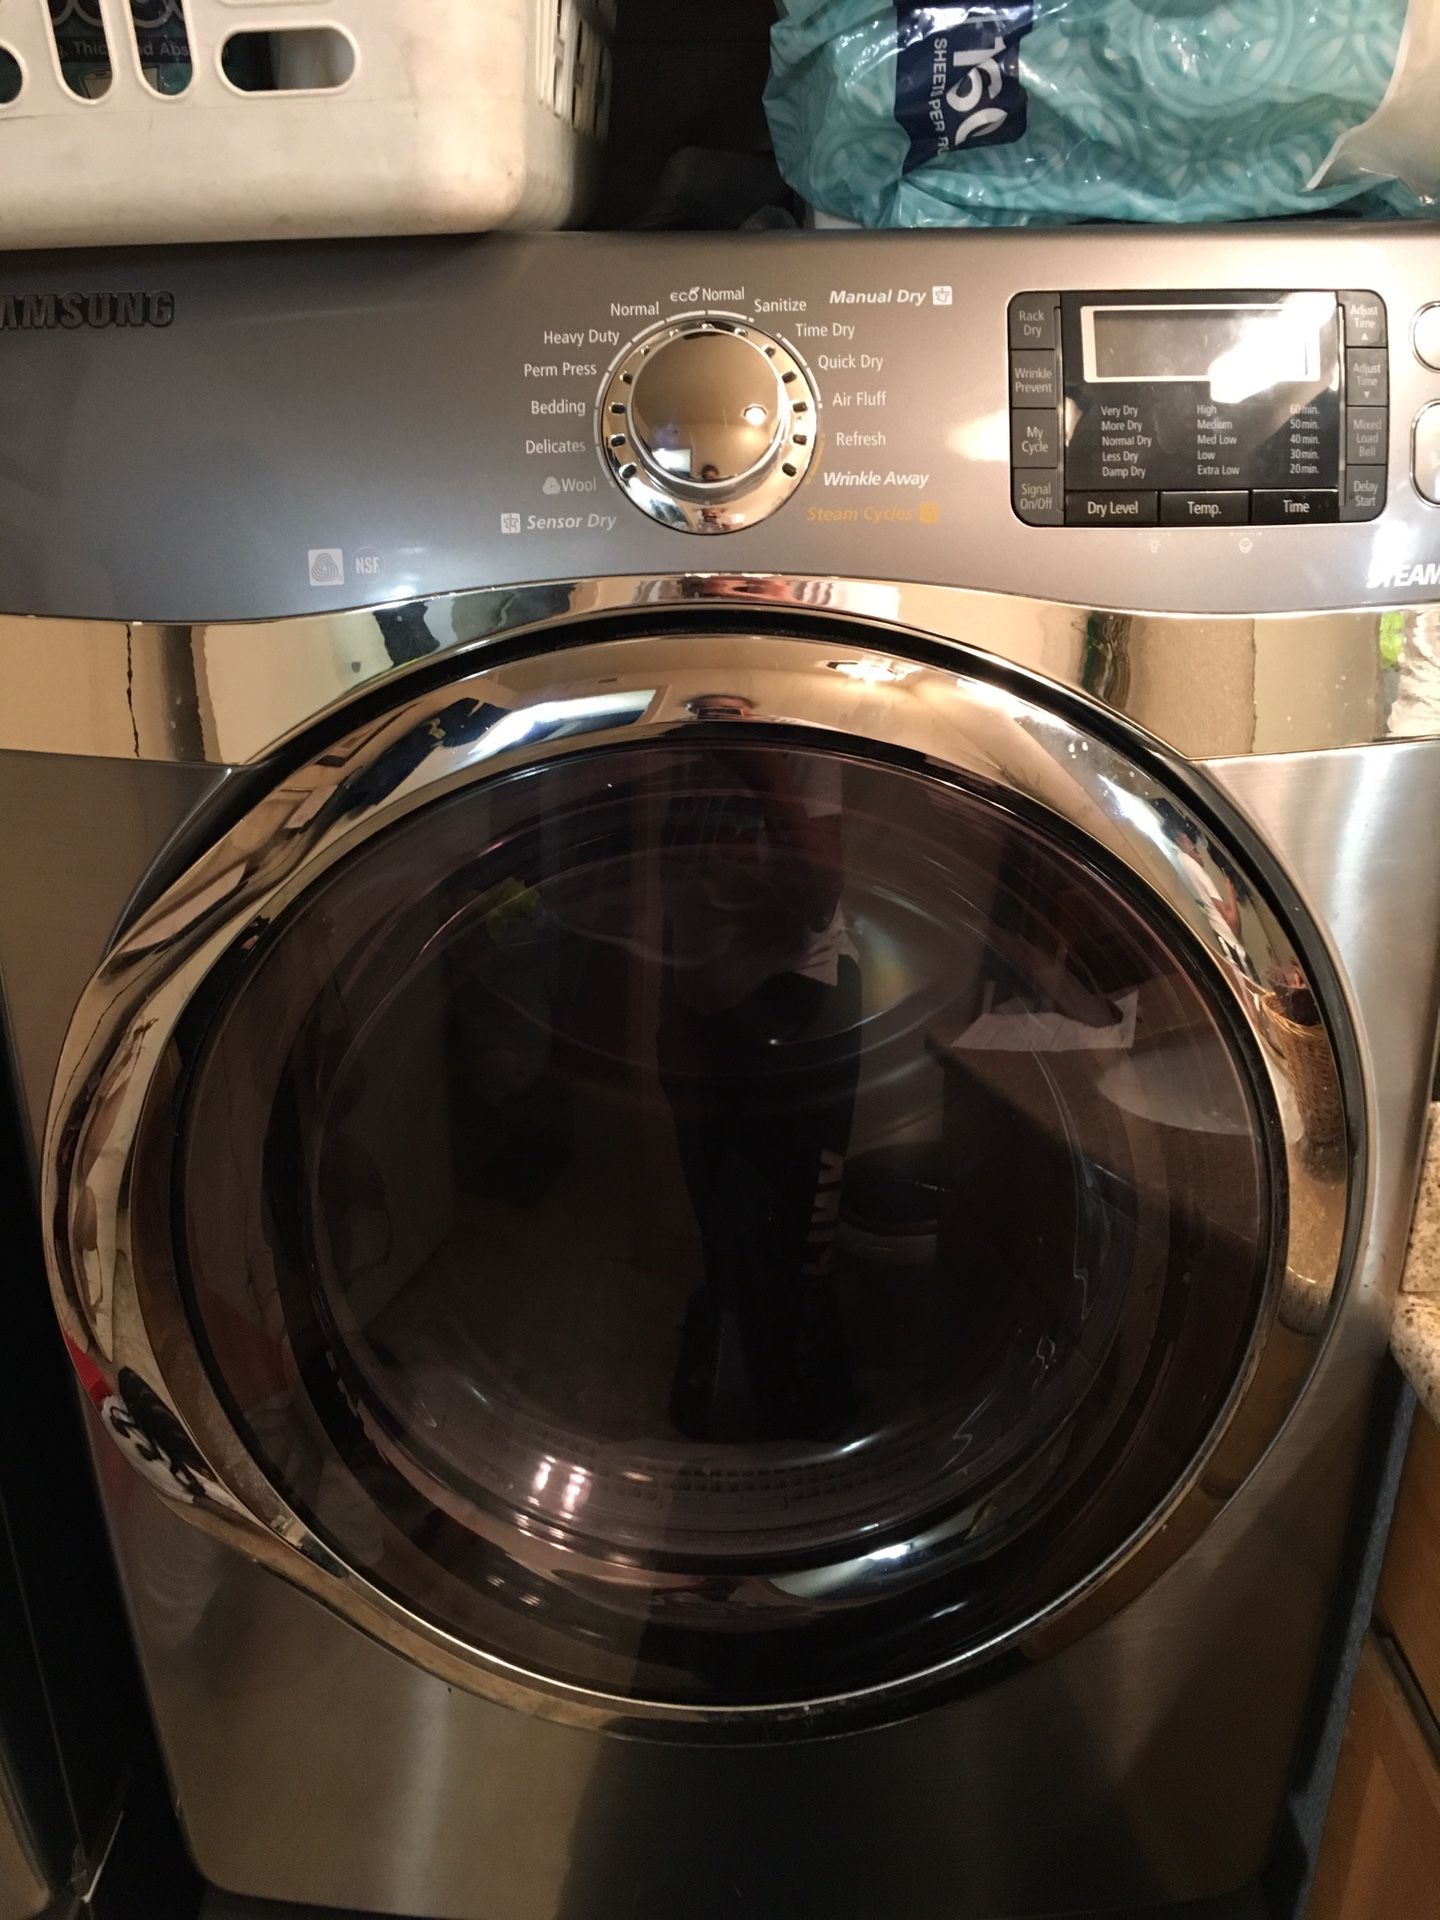 Samsung Dryer and Washer